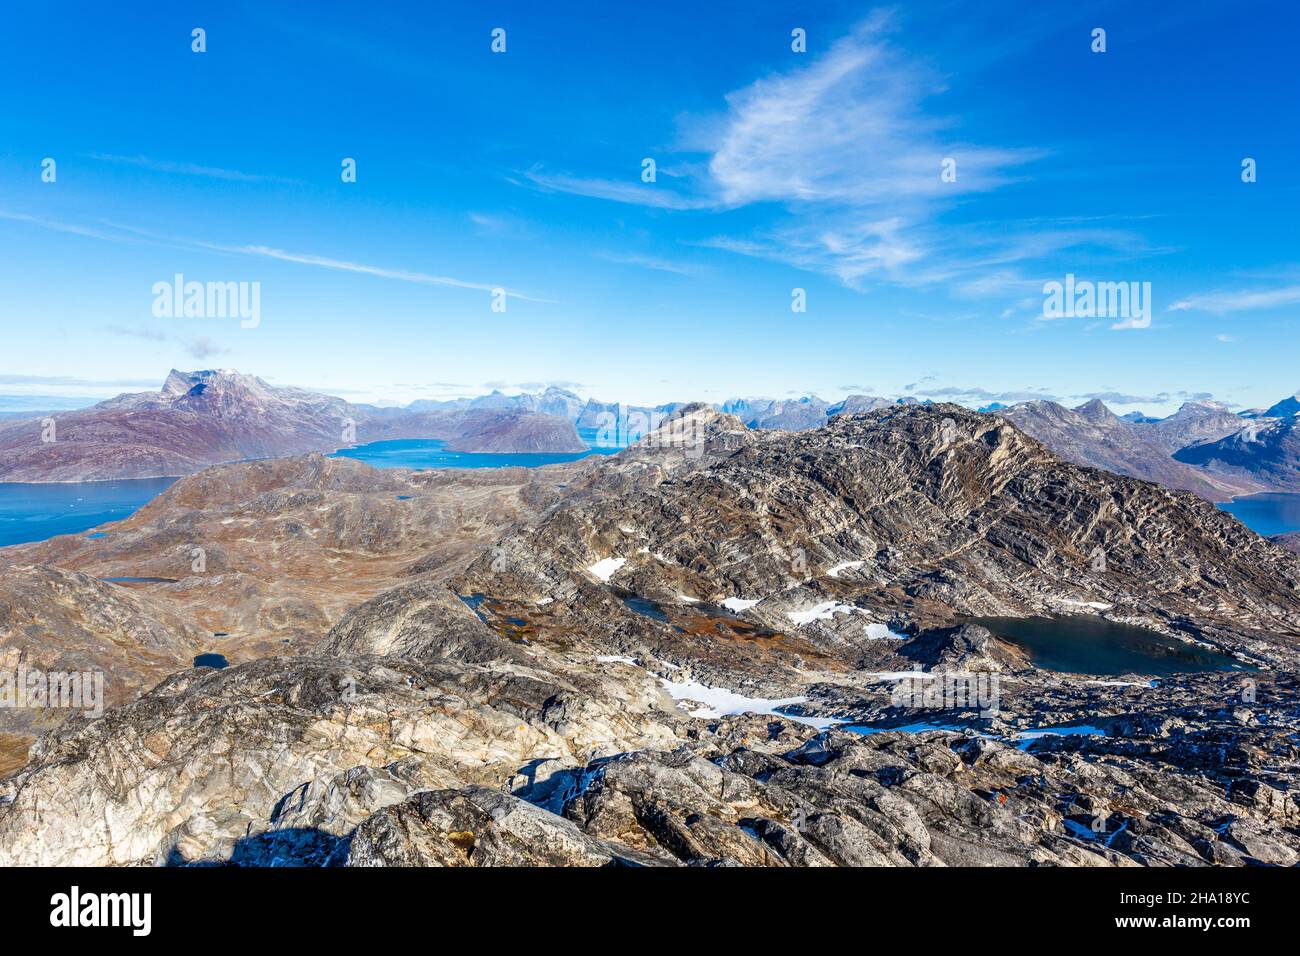 View to Nuuk fjord and surrounding mountains from the top of Store Malena mountain, Greenland Stock Photo